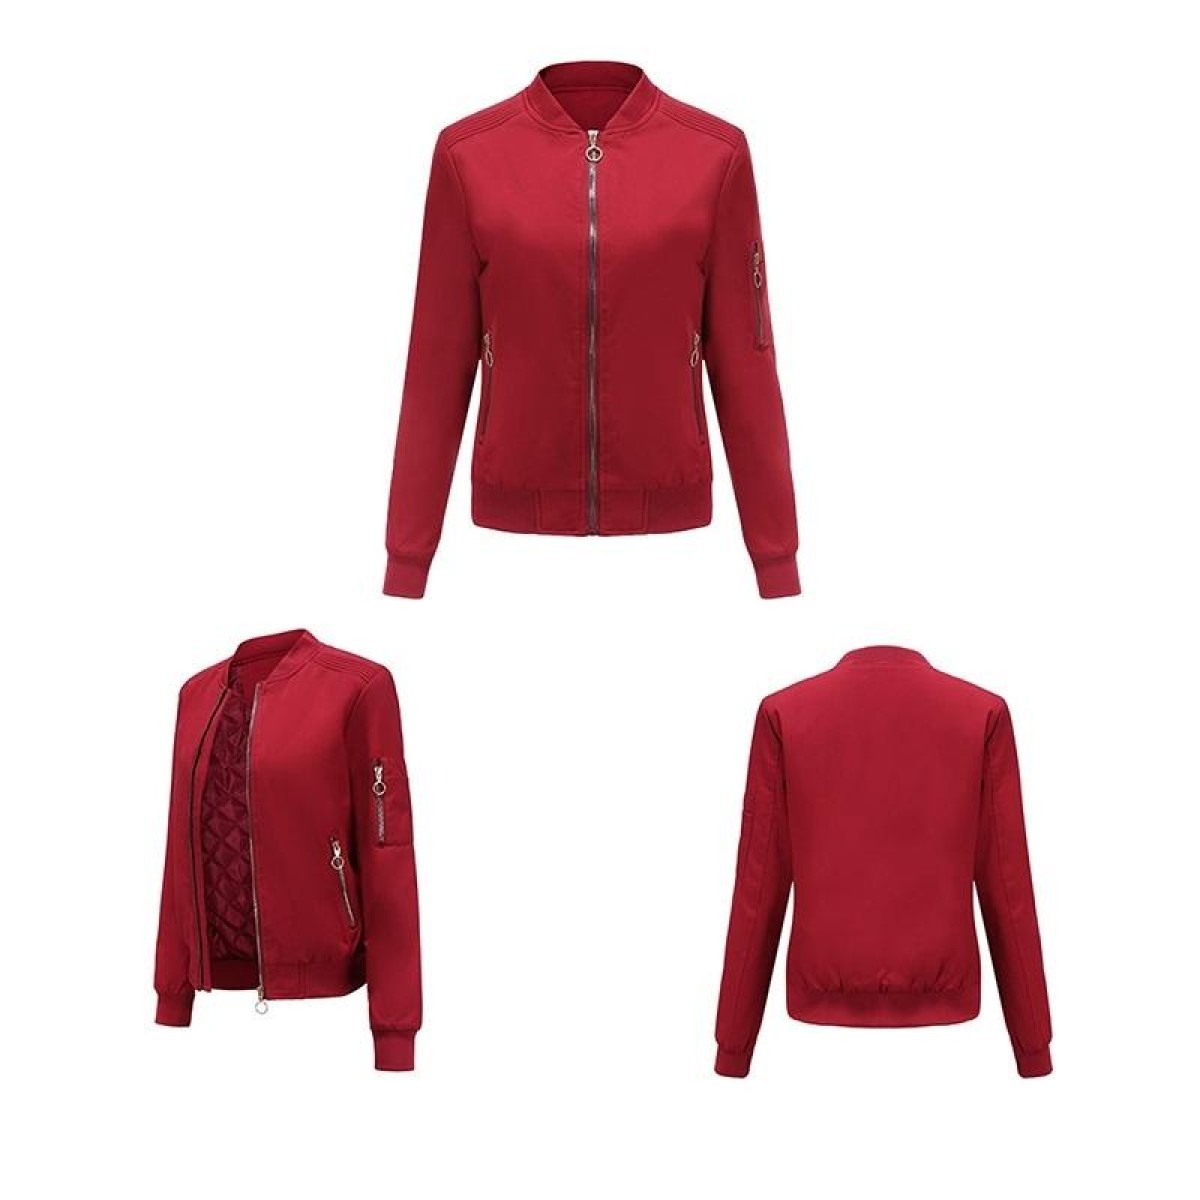 Autumn And Winter Thin Cotton Zipper Jacket Casual Coat For Women (Color:Wine Red Size:XL)